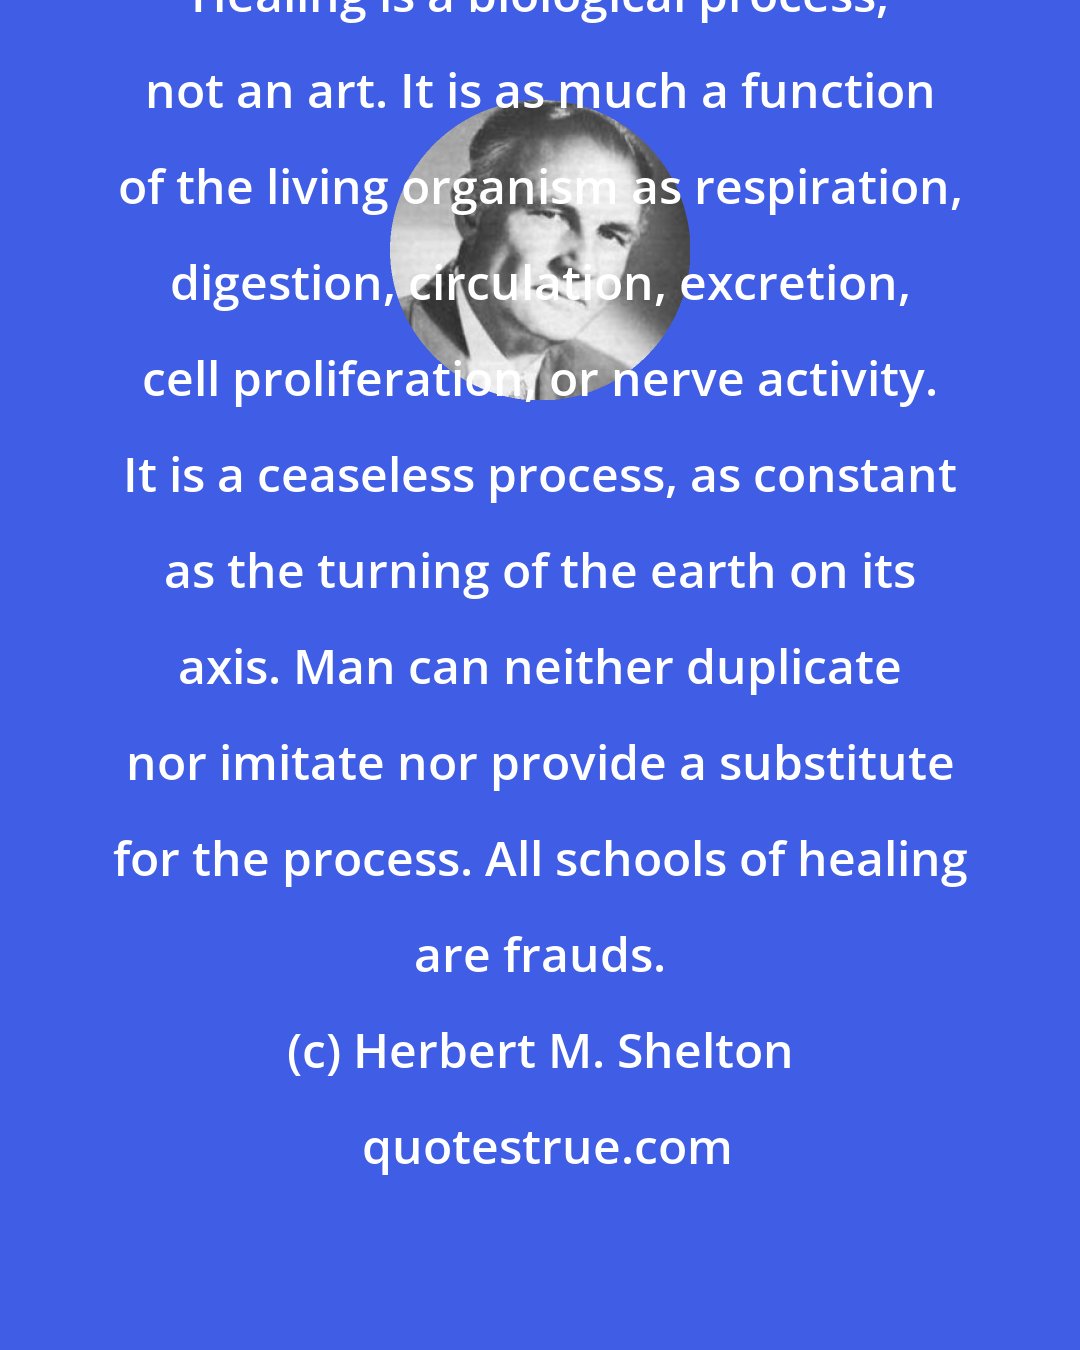 Herbert M. Shelton: Healing is a biological process, not an art. It is as much a function of the living organism as respiration, digestion, circulation, excretion, cell proliferation, or nerve activity. It is a ceaseless process, as constant as the turning of the earth on its axis. Man can neither duplicate nor imitate nor provide a substitute for the process. All schools of healing are frauds.